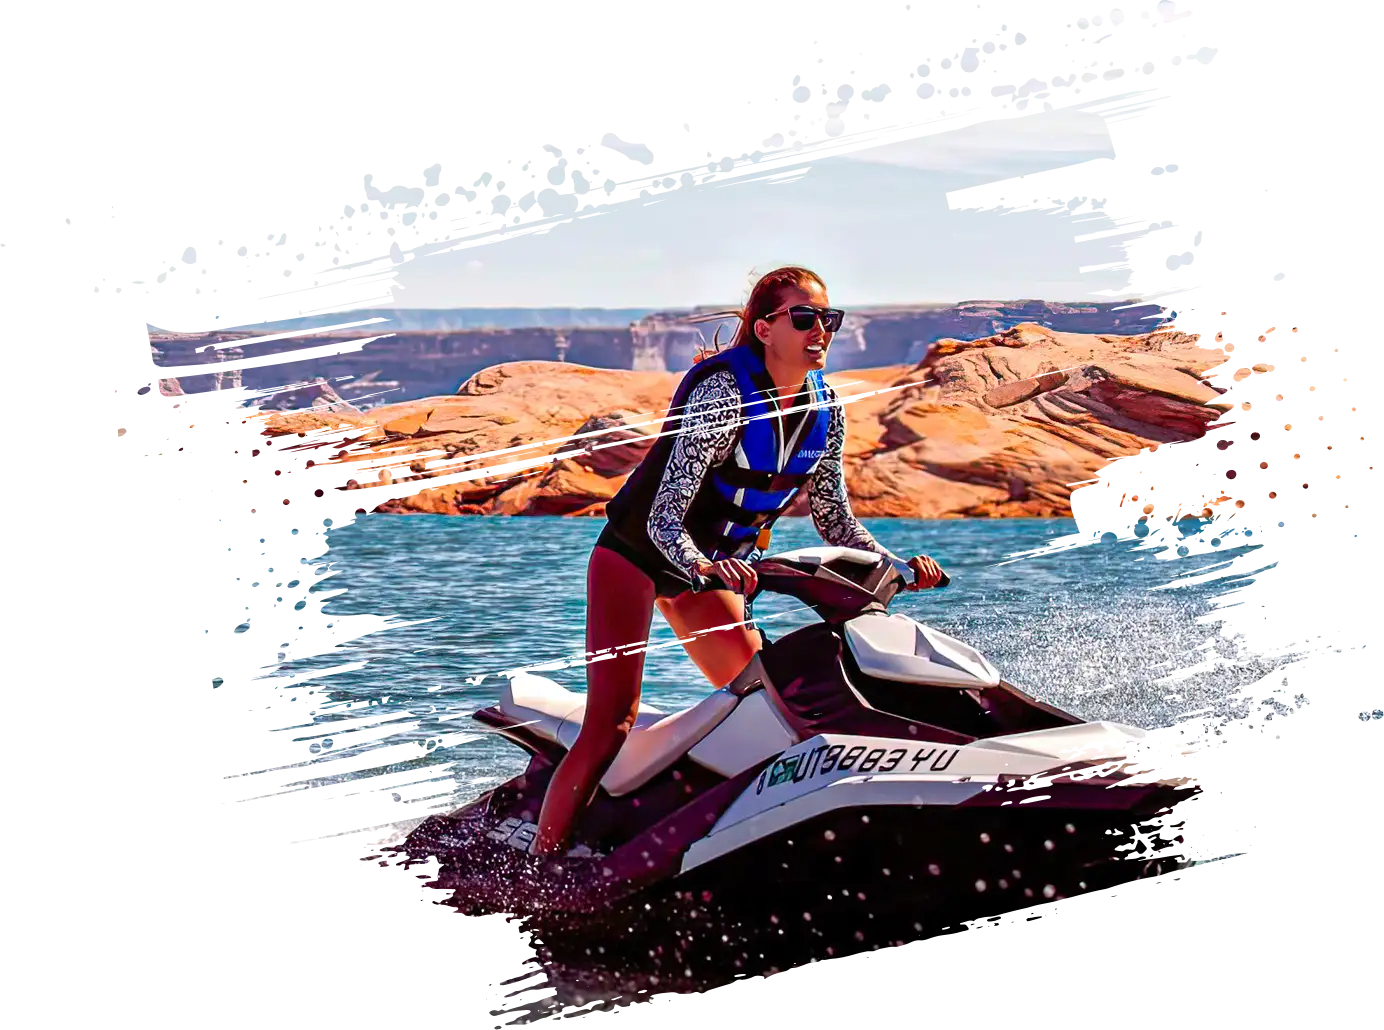 A female enjoying a ride on a jet ski across the water.